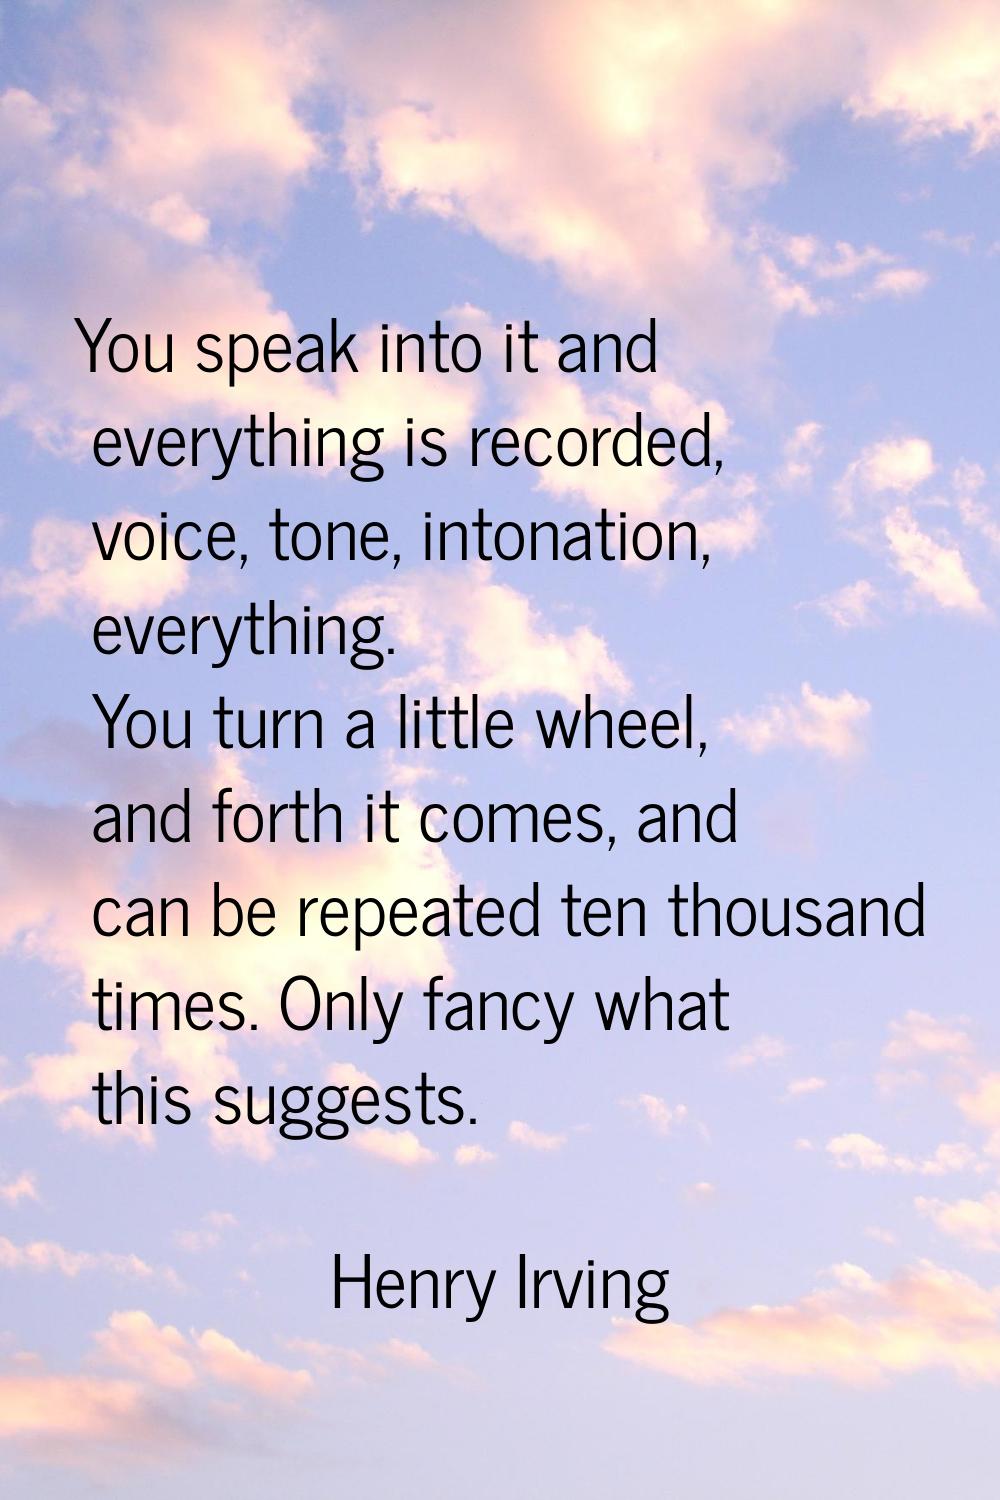 You speak into it and everything is recorded, voice, tone, intonation, everything. You turn a littl